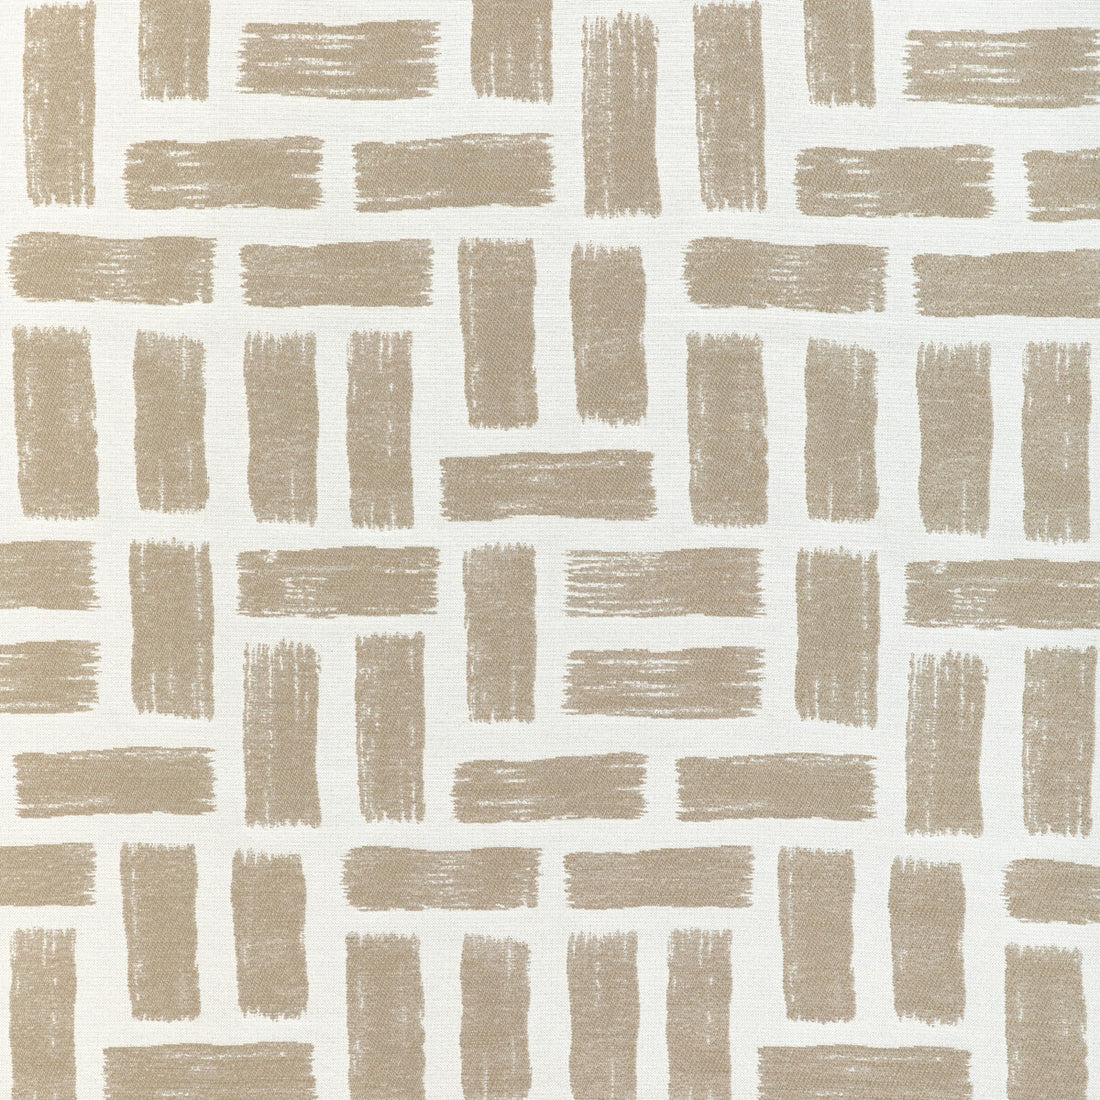 Brickwork fabric in taupe color - pattern 37055.106.0 - by Kravet Design in the Thom Filicia Latitude collection